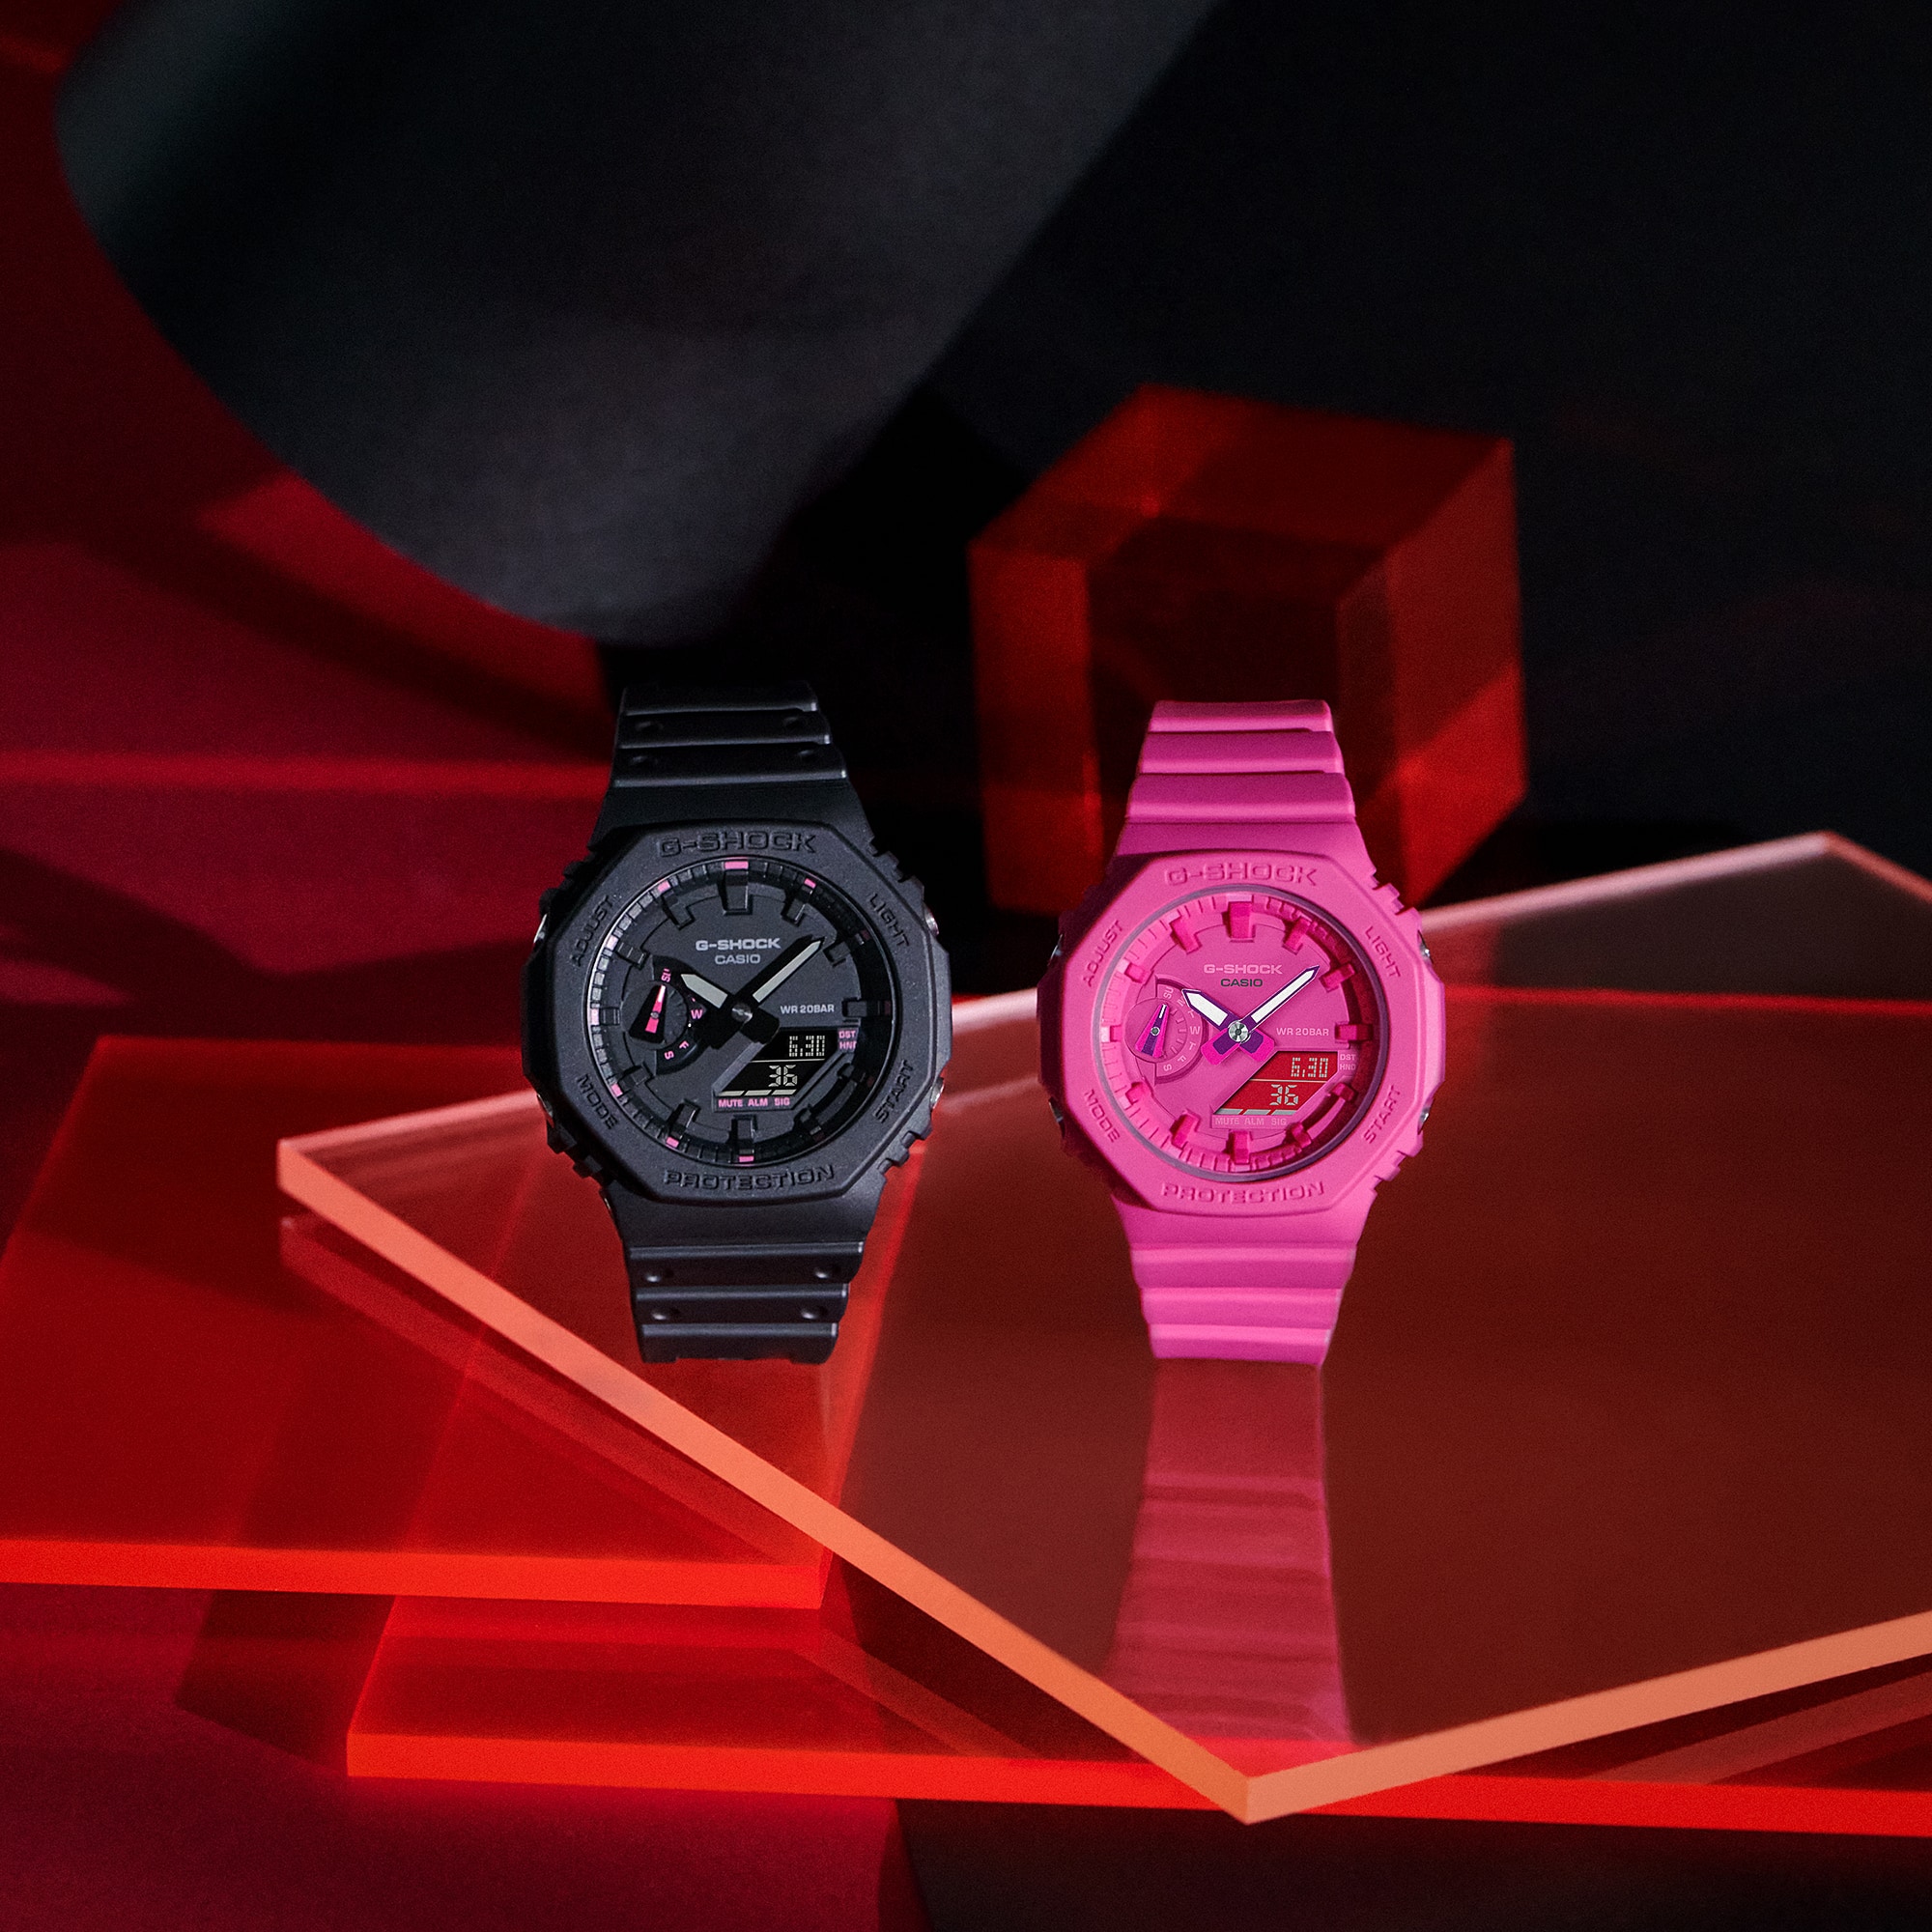 GA2100P-1A Black with Pink accent and GMAS2100P-4A Pink Analog Digital Watches